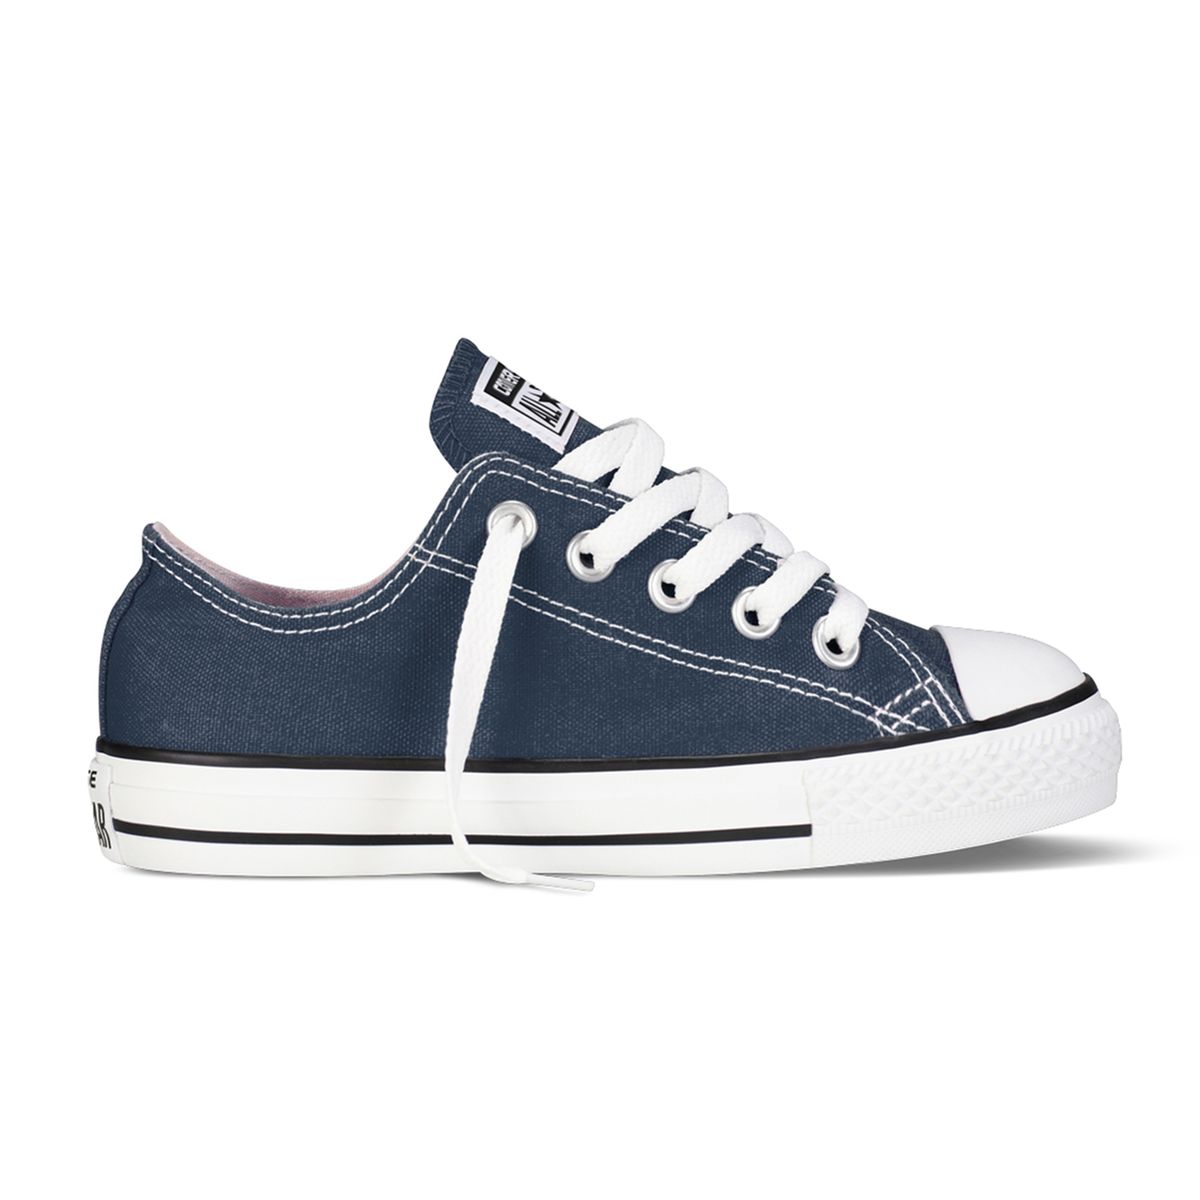 Chaussures fille CONVERSE | La Redoute